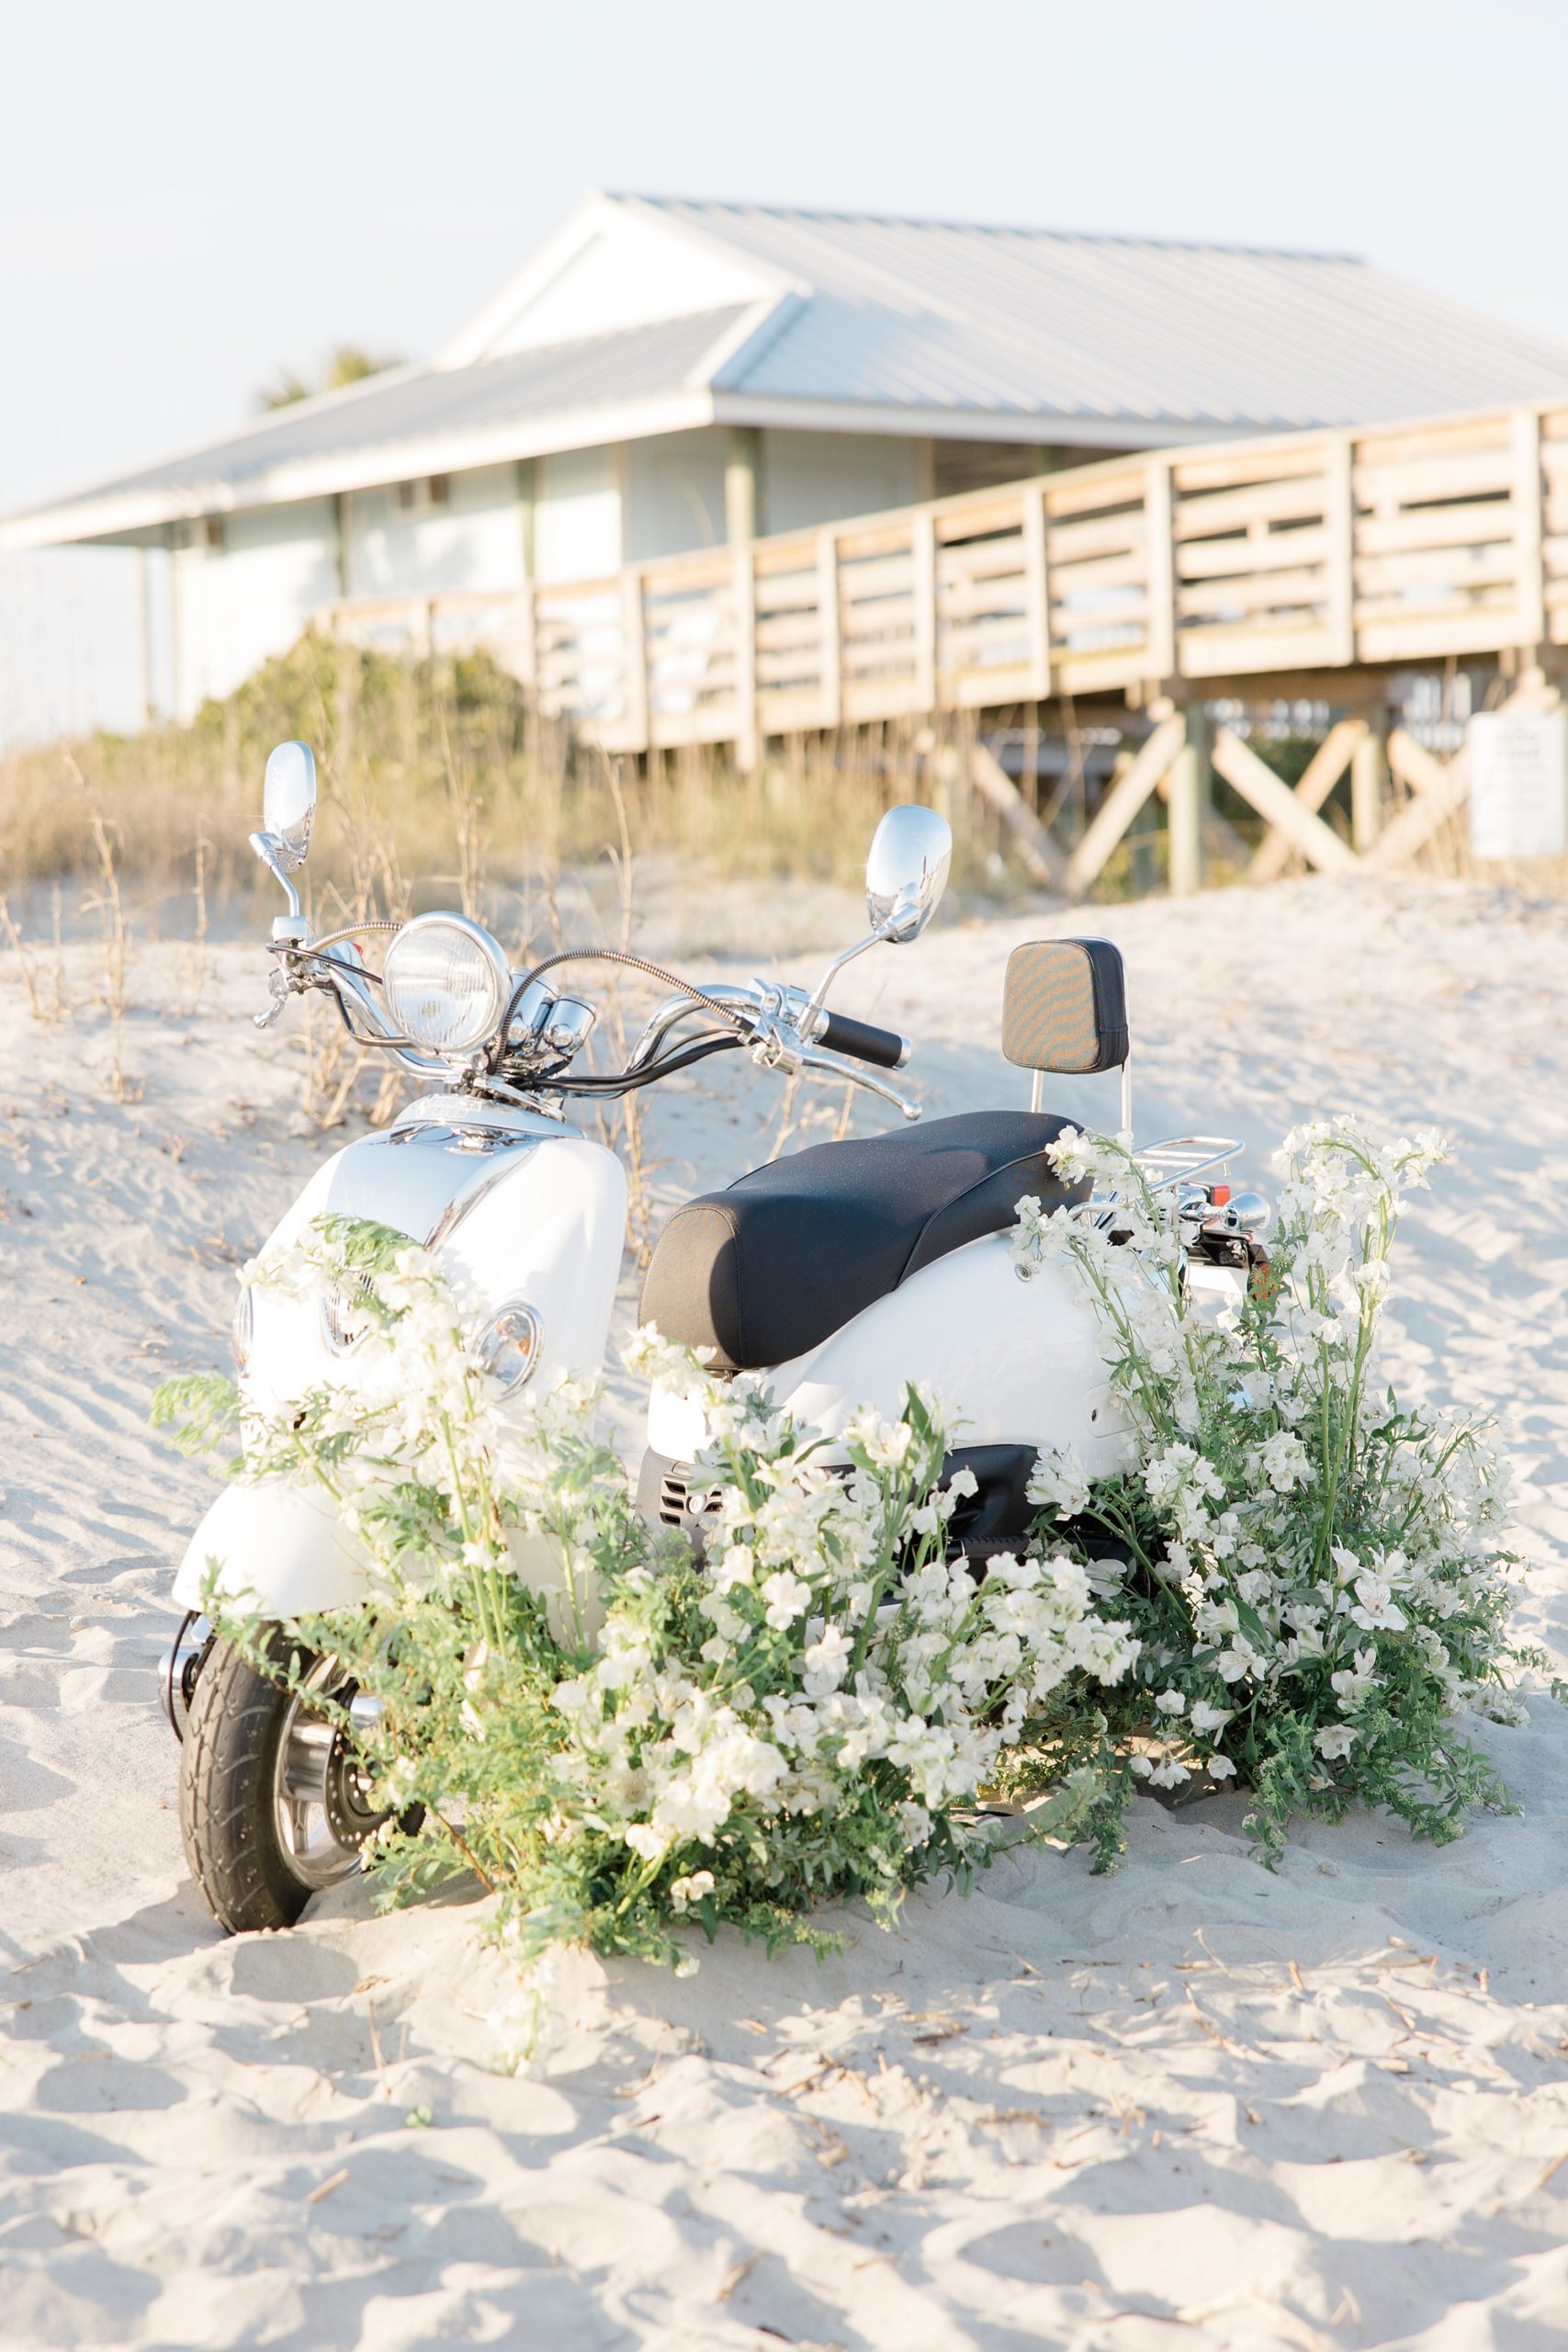 white vespa sits with floral display 